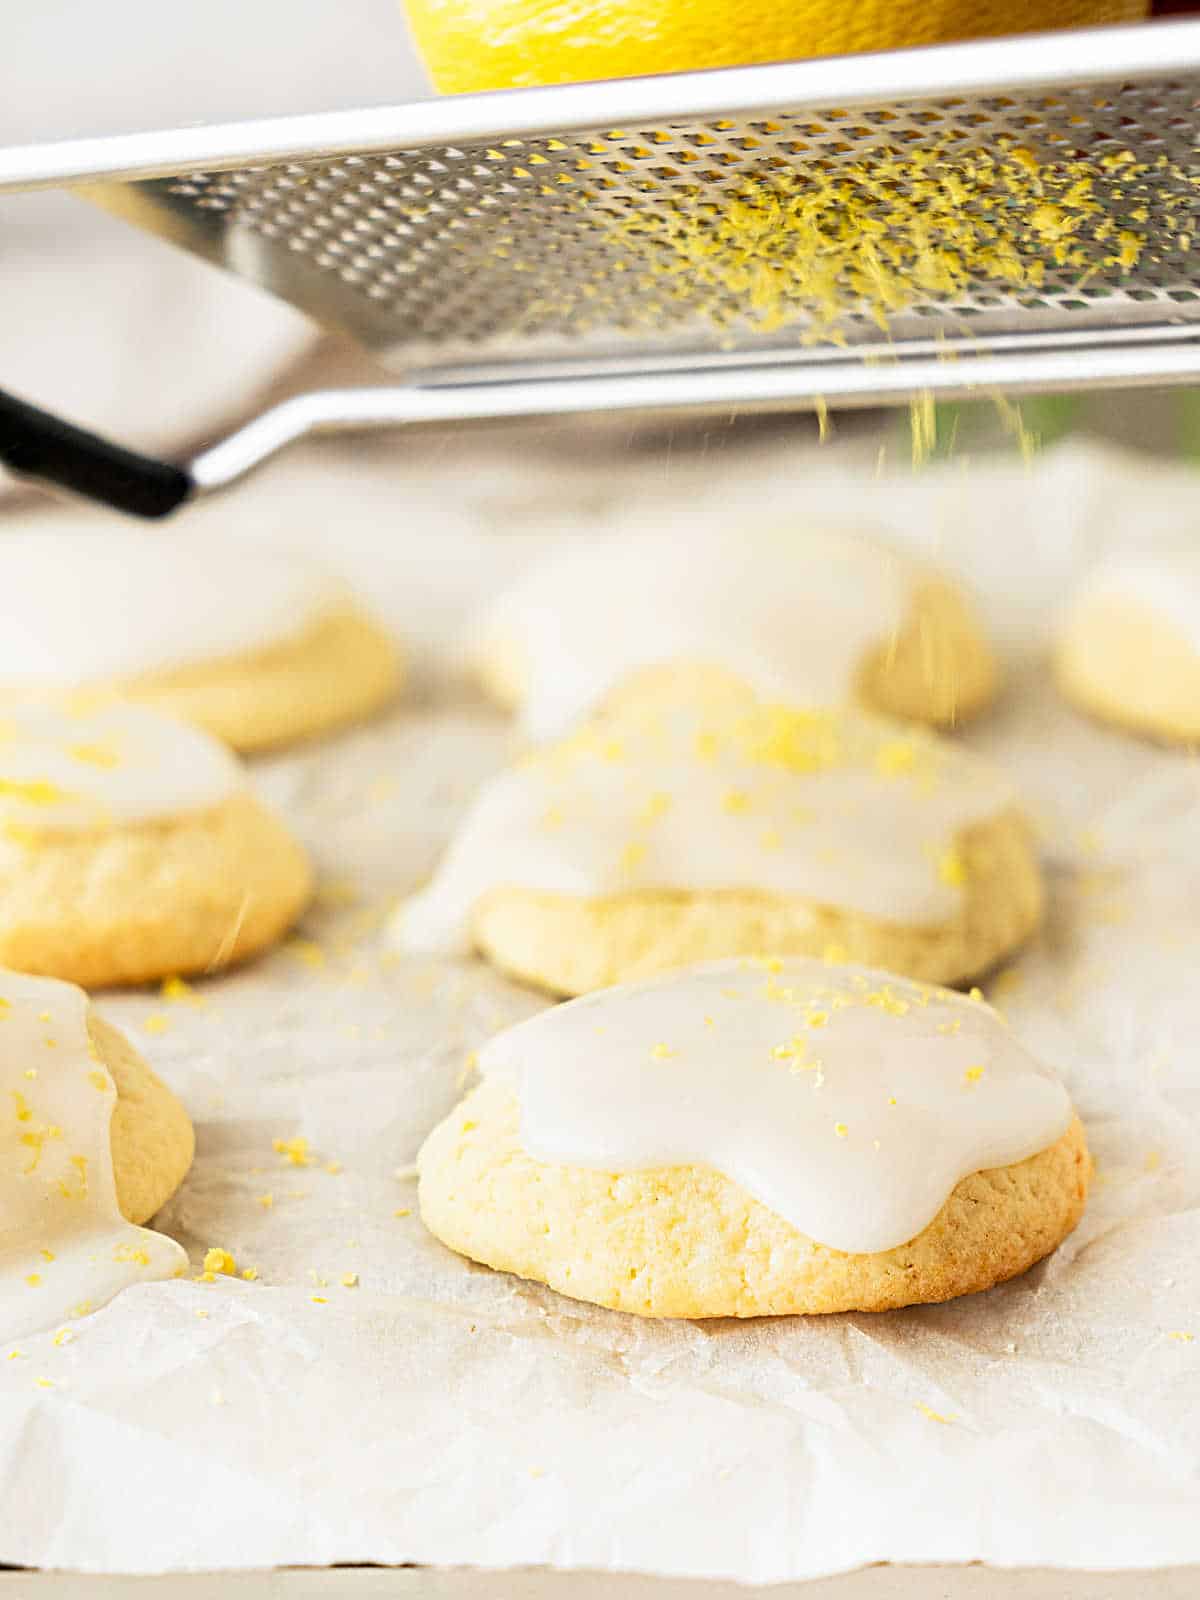 Zesting lemon over glazed ricotta cookies on white parchment paper.